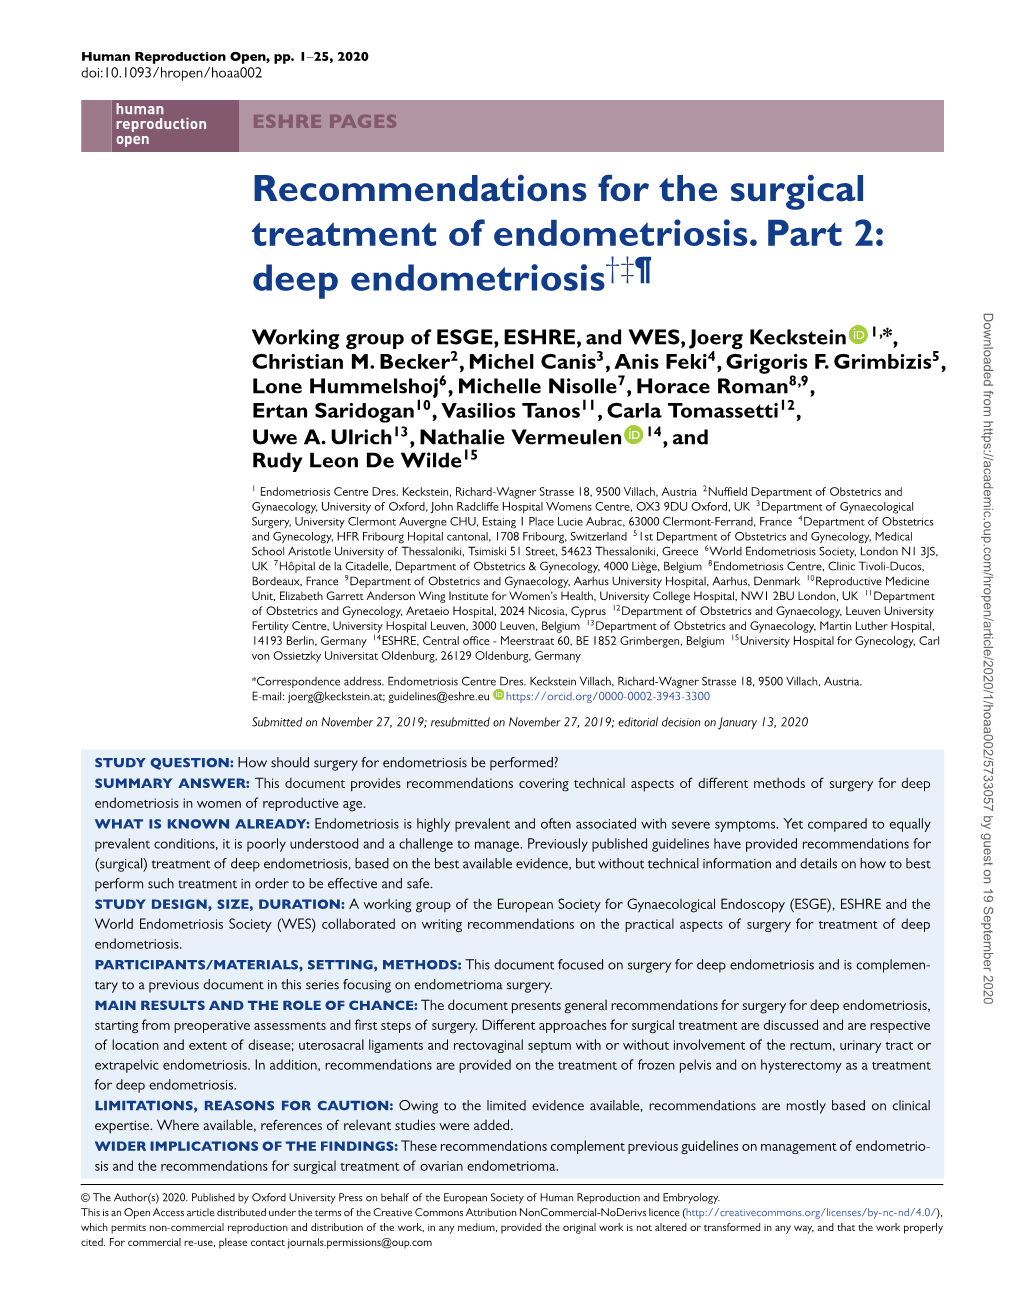 Recommendations for the Surgical Treatment of Endometriosis